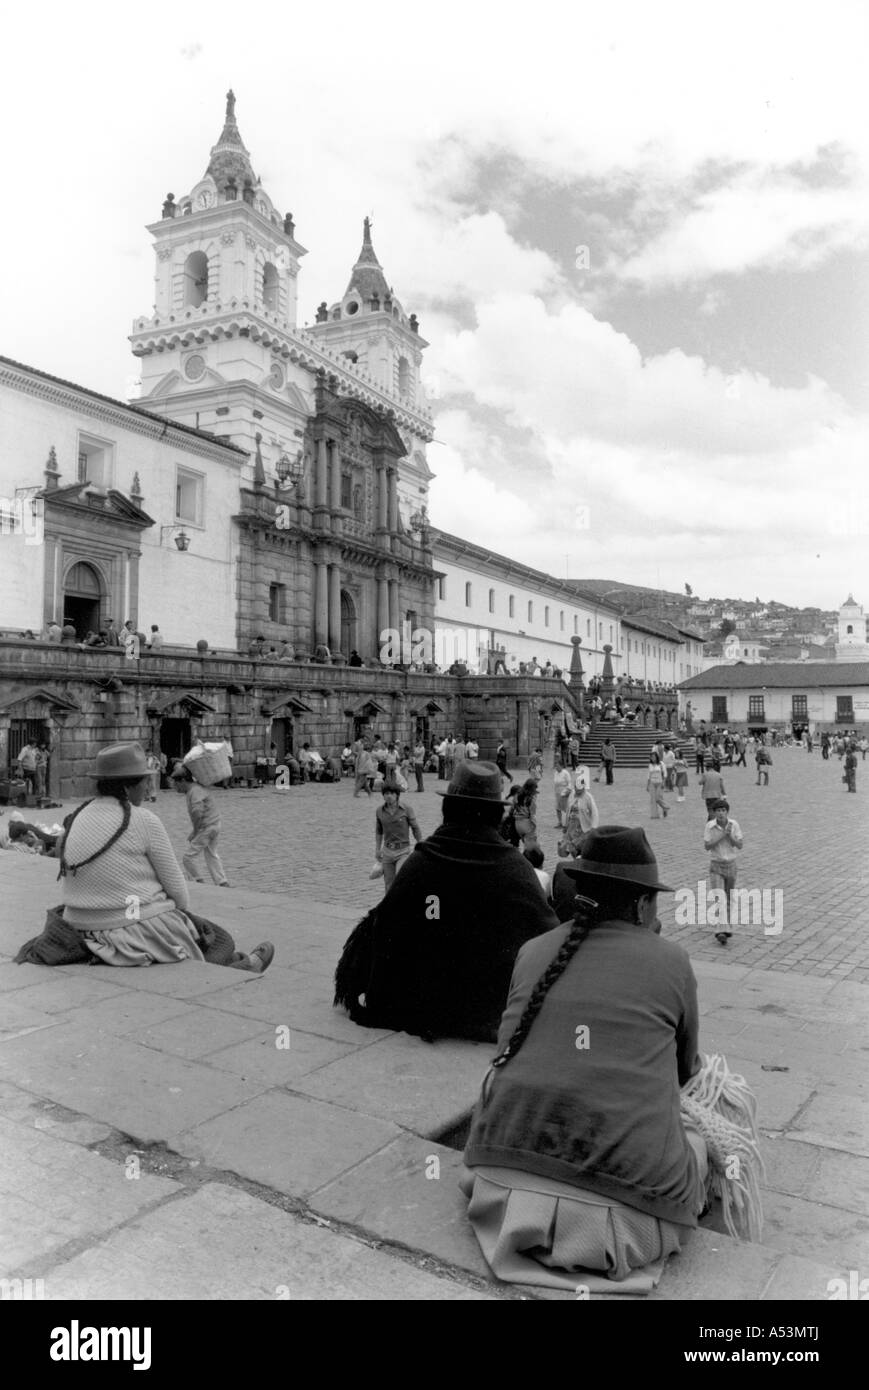 Painet ha1461 292 black and white landcape main square cathedral quito ecuador country developing nation less economically Stock Photo